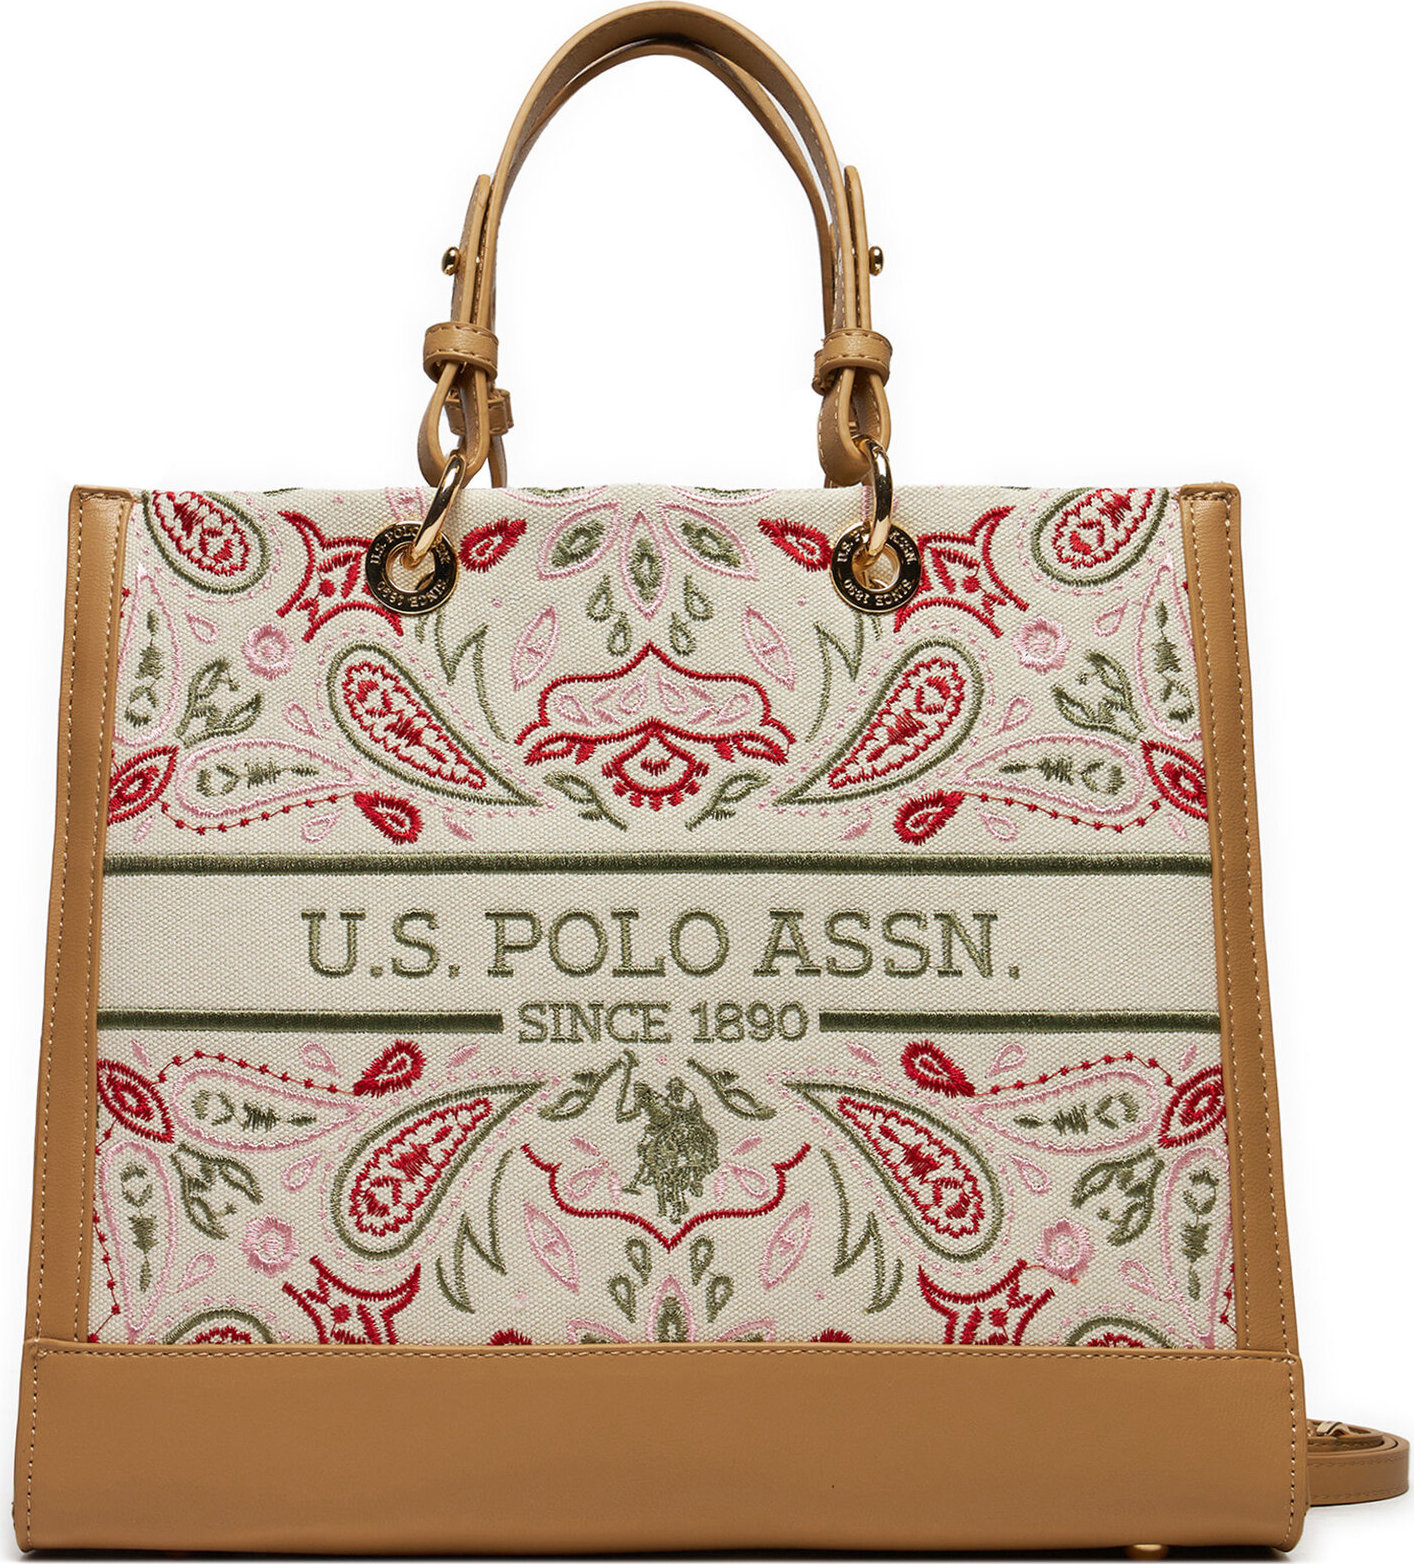 Kabelka U.S. Polo Assn. BEUQY6441WC2N61 Natural Multi